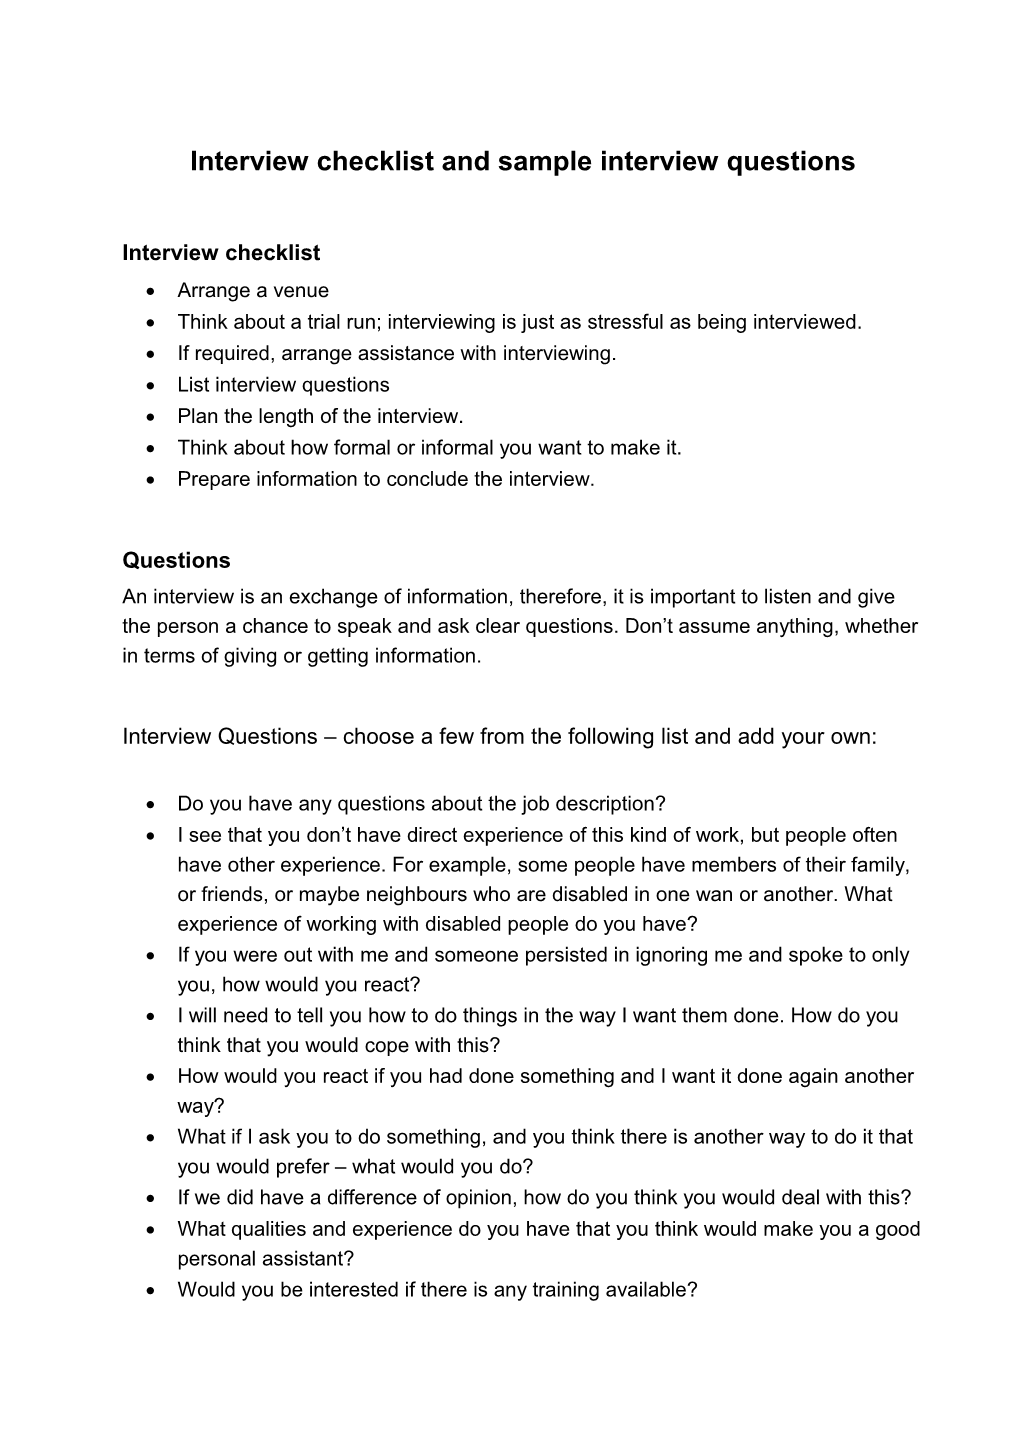 Interview Checklist and Sample Interview Questions-App